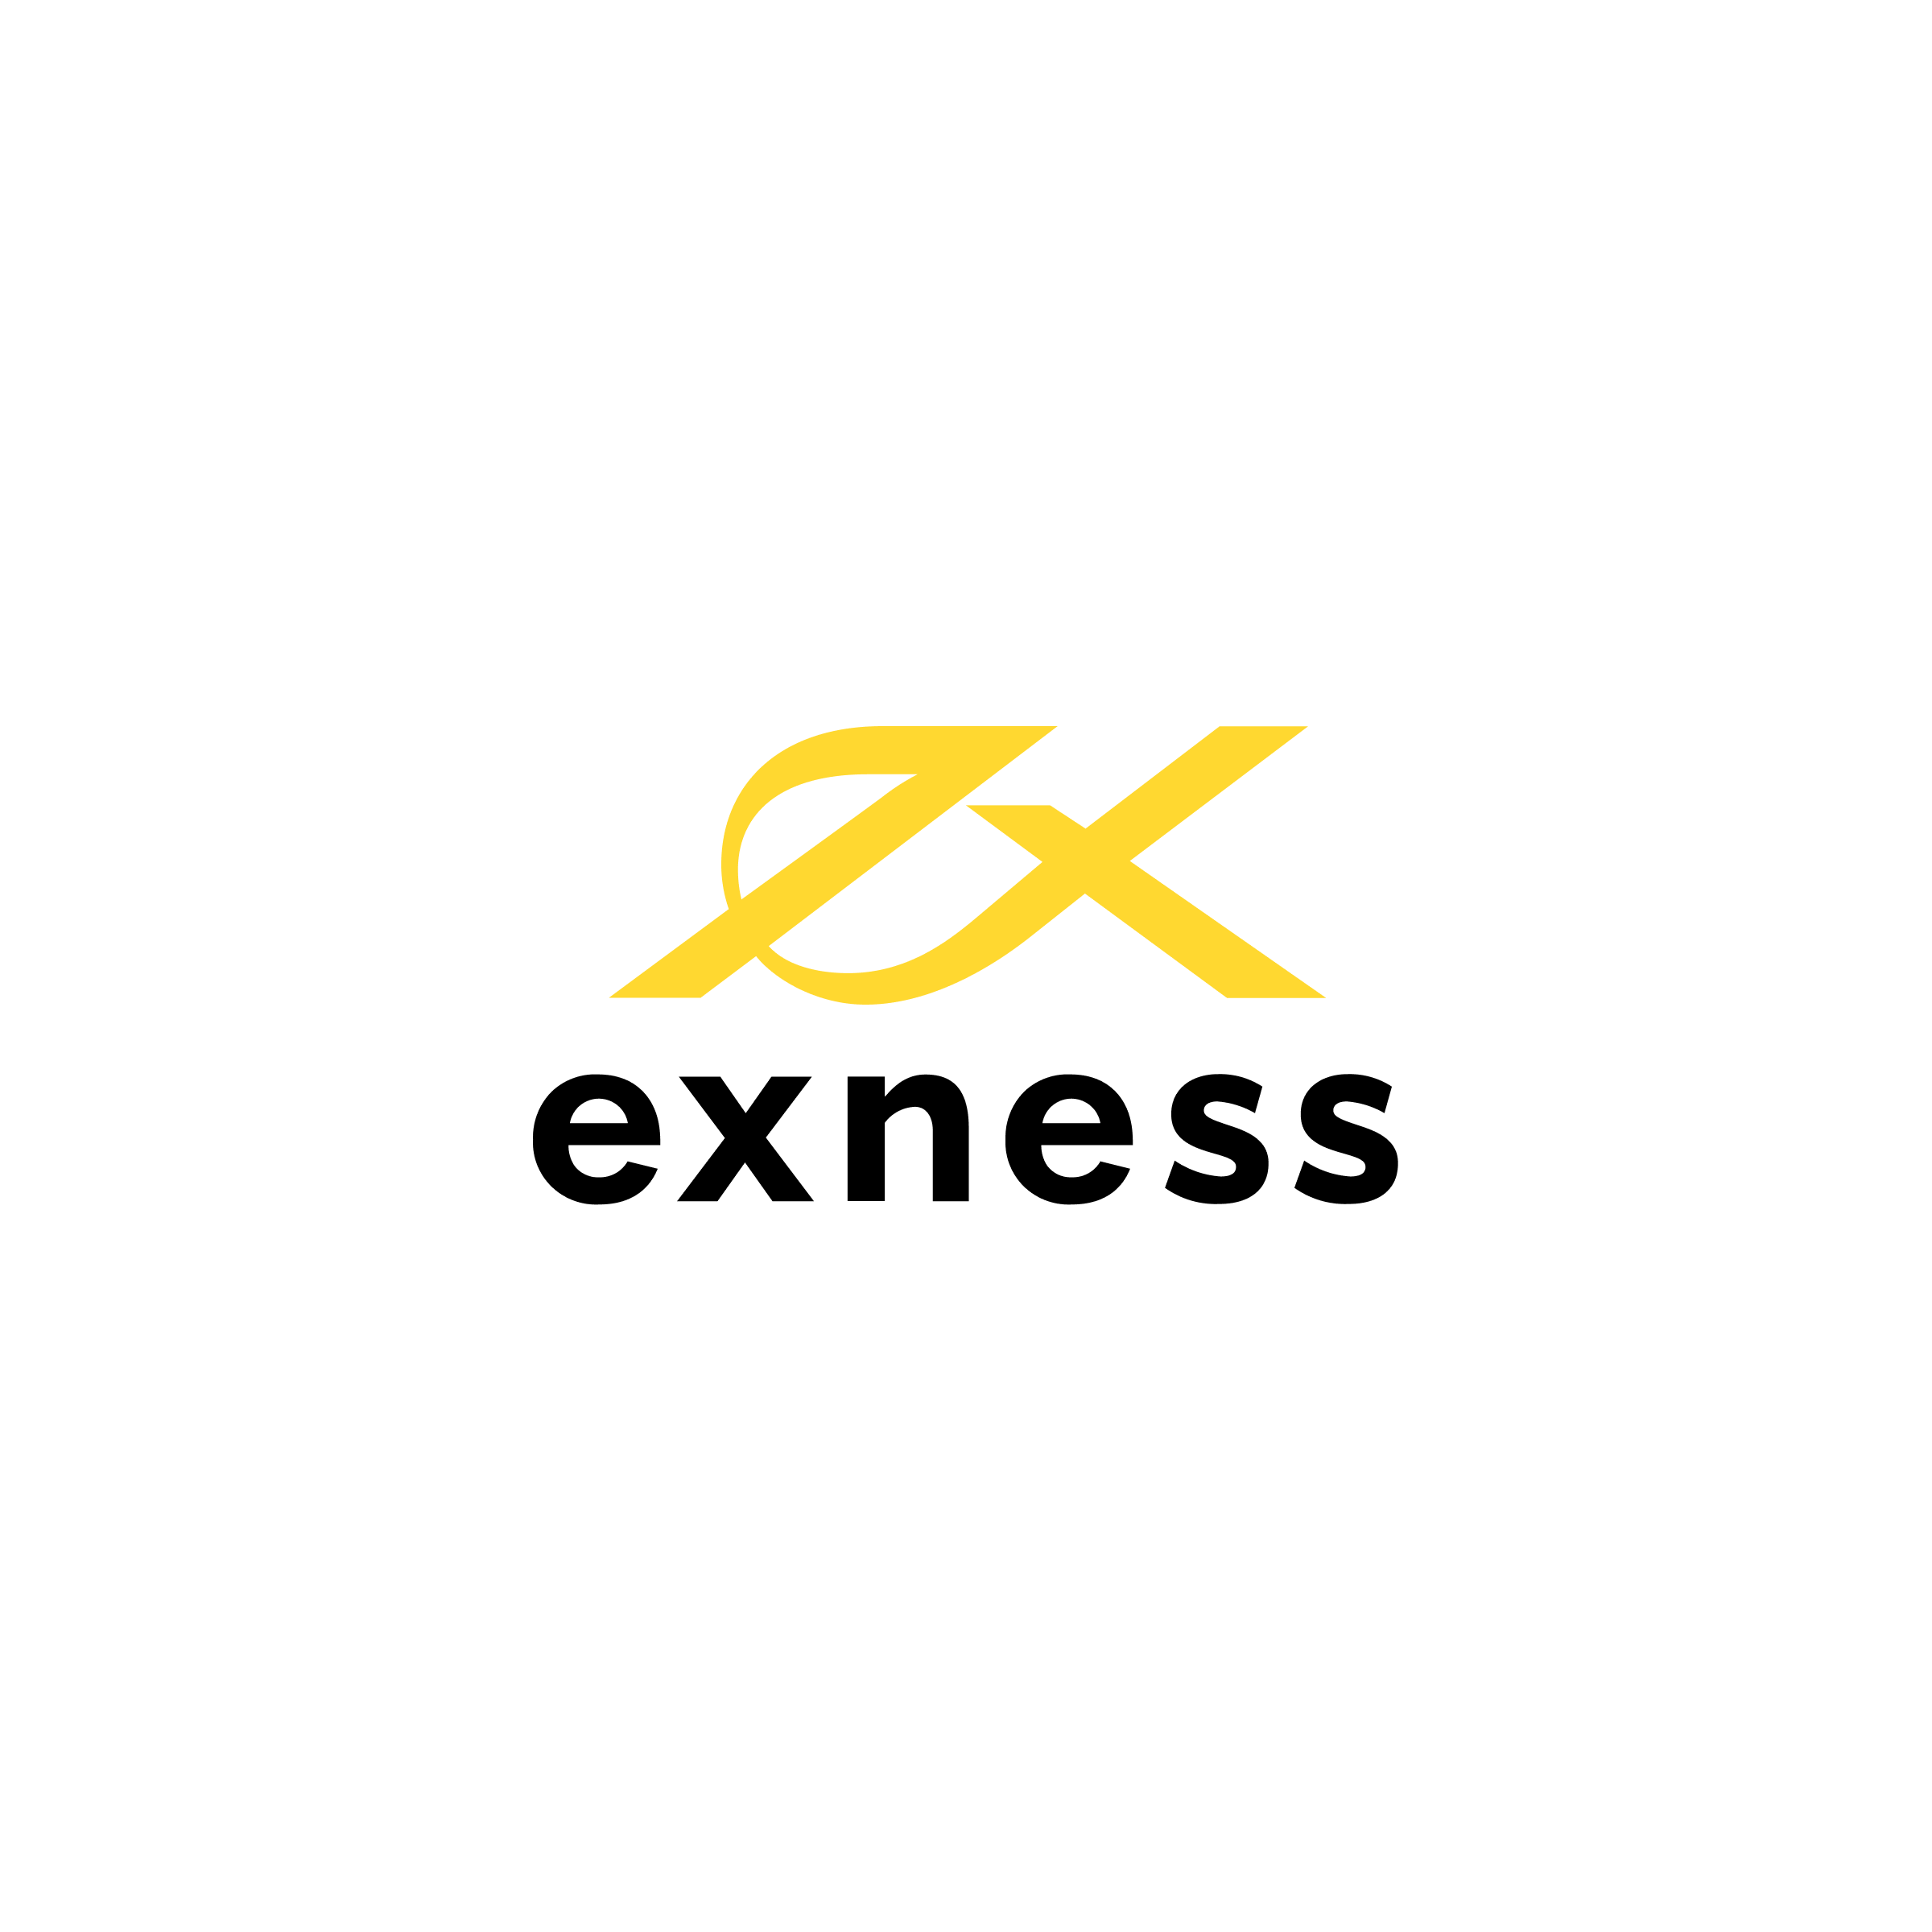 What Everyone Must Know About Exness